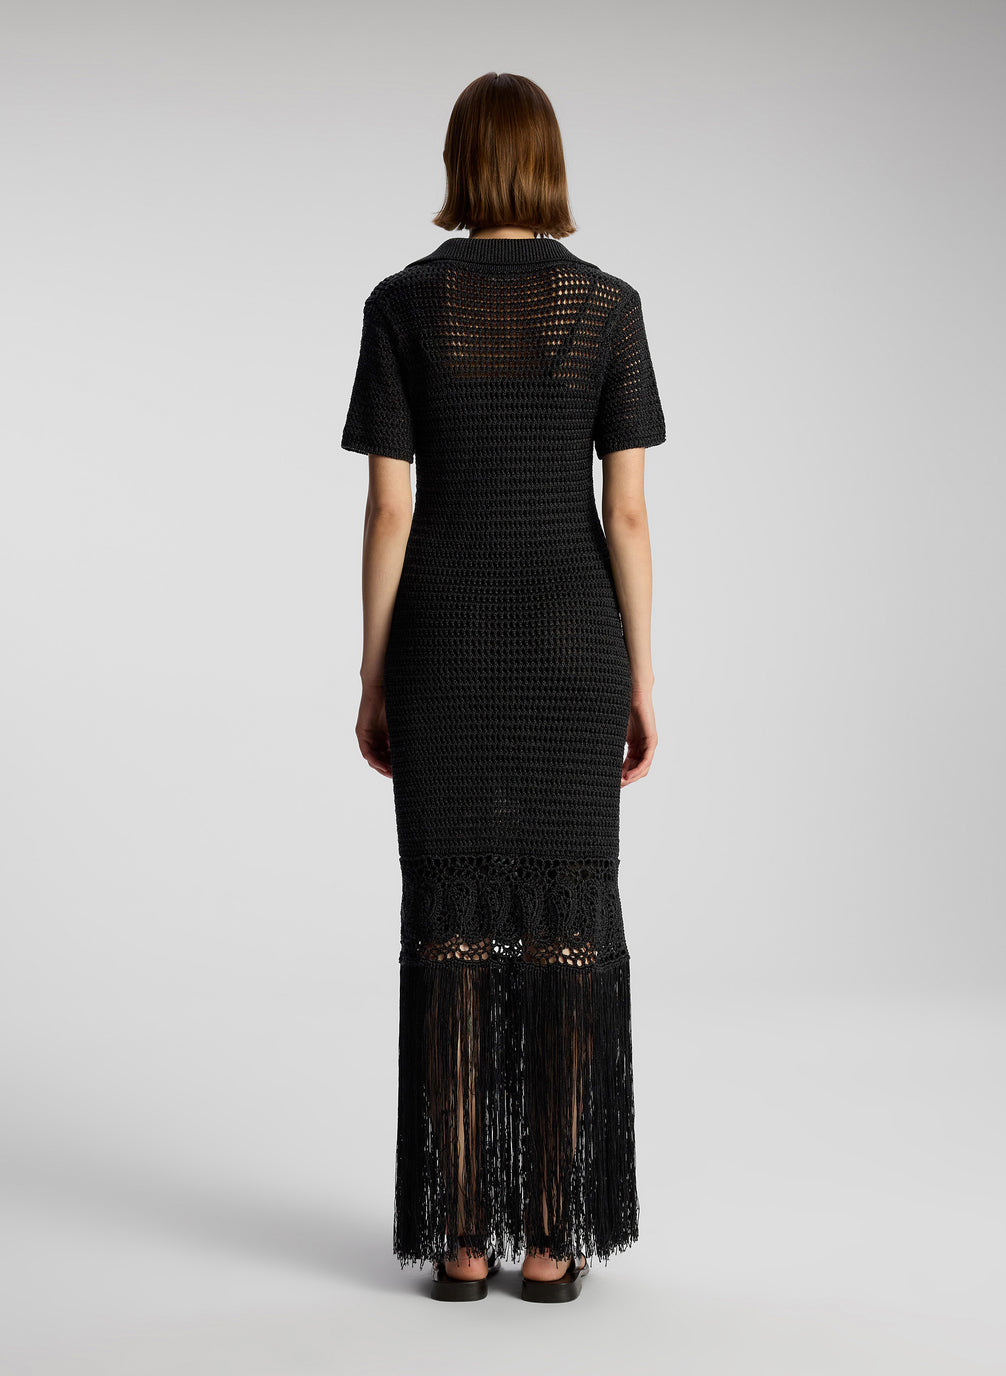 back view of woman wearing black crochet cover up maxi dress